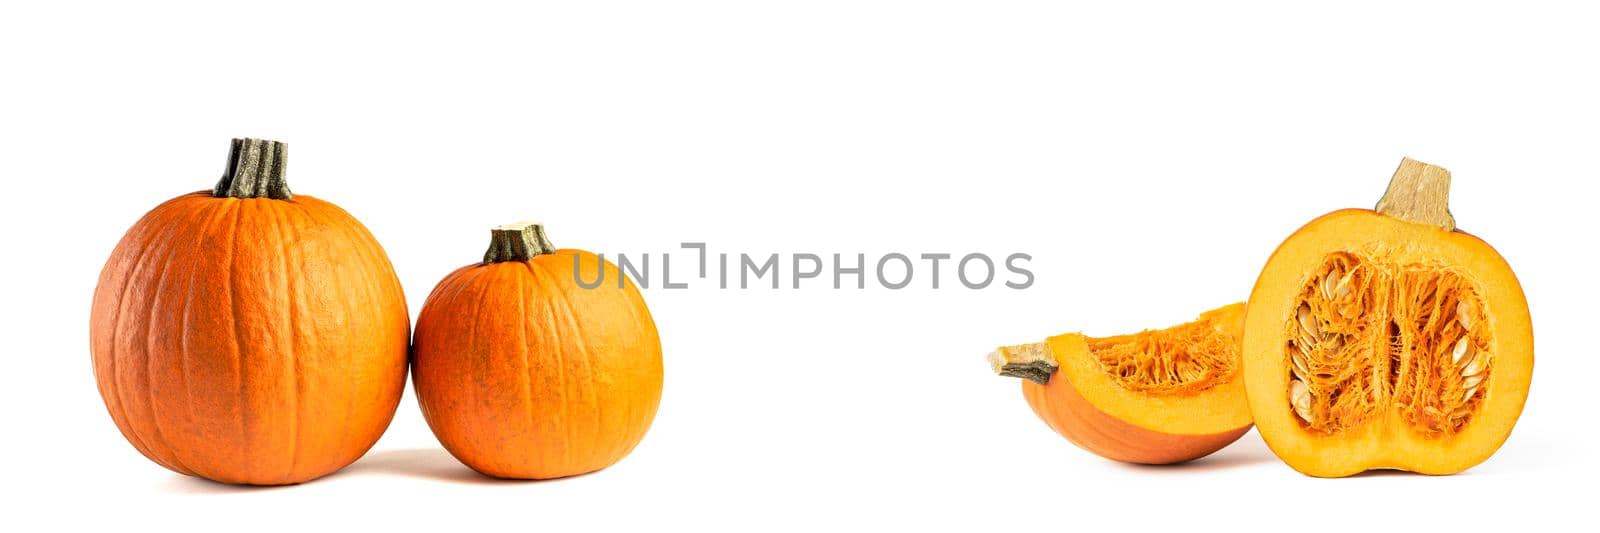 Pumpkin on a white background. Halloween theme. Highlight the pumpkin on white to insert into your project or design. Set of images, whole pumpkin and cut into pieces on white. Casts a shadow.